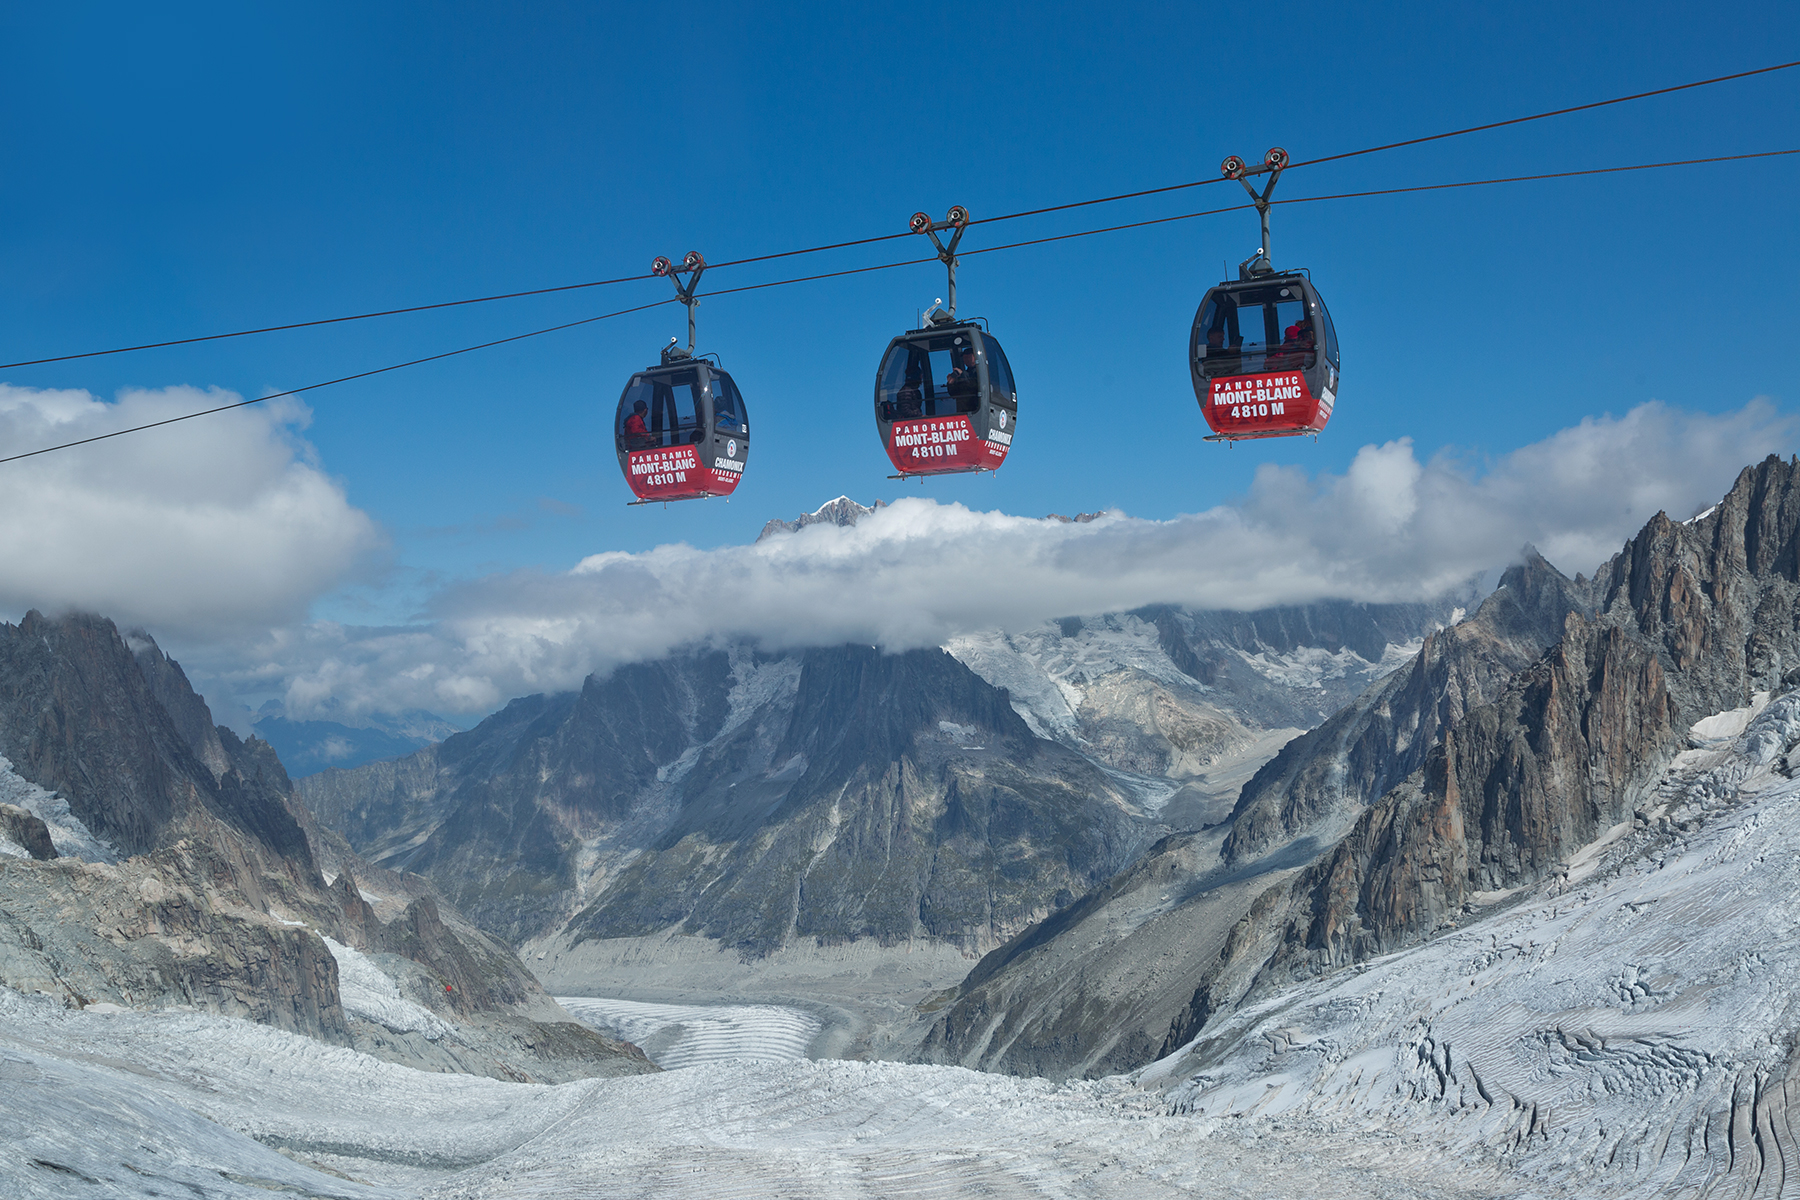 Hovering over the French Alps Above Chamonix by Rick Steves